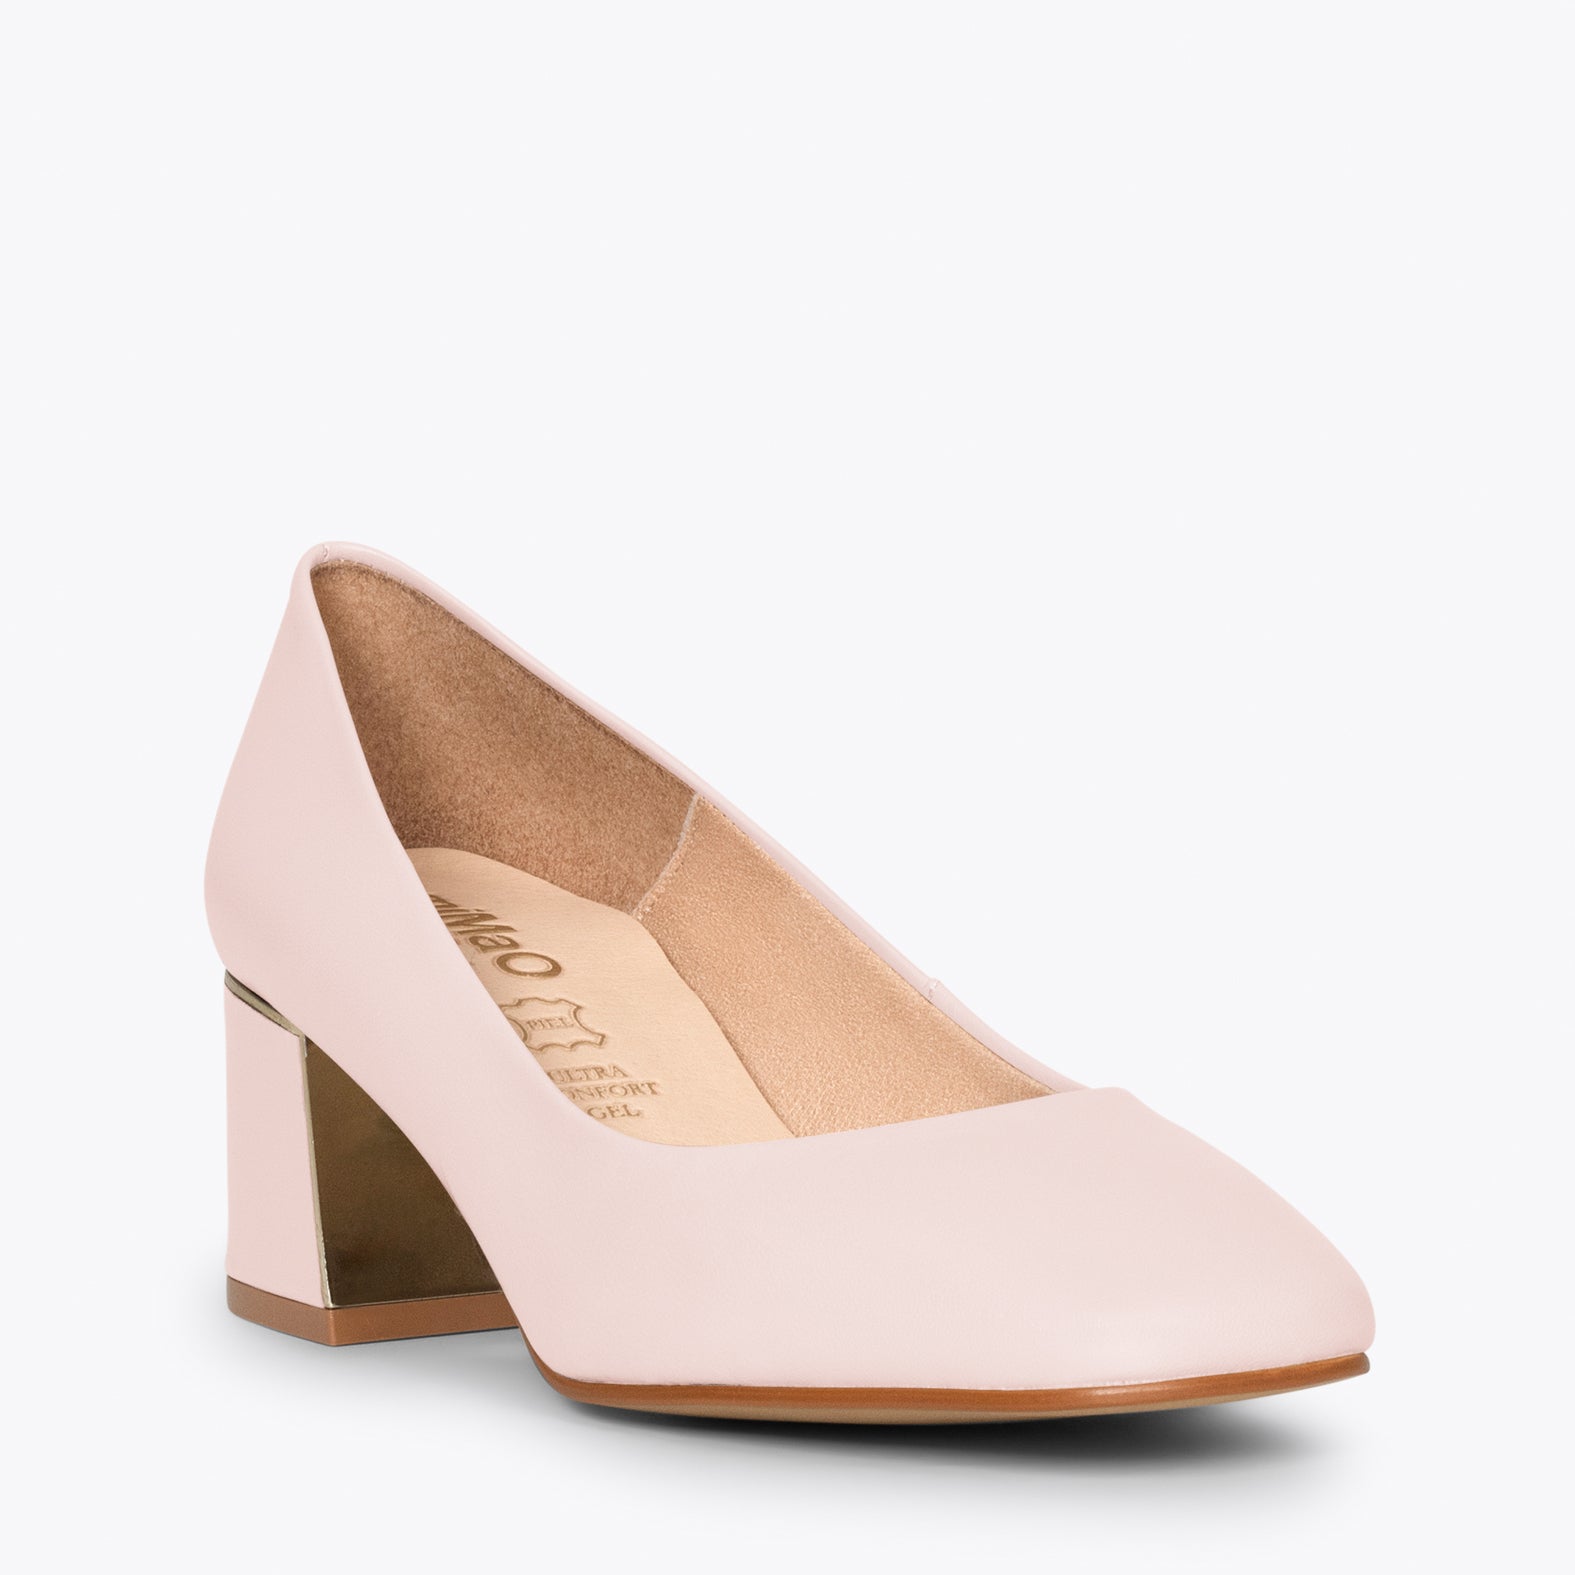 FEMME – NUDE mid heel shoes with square toe